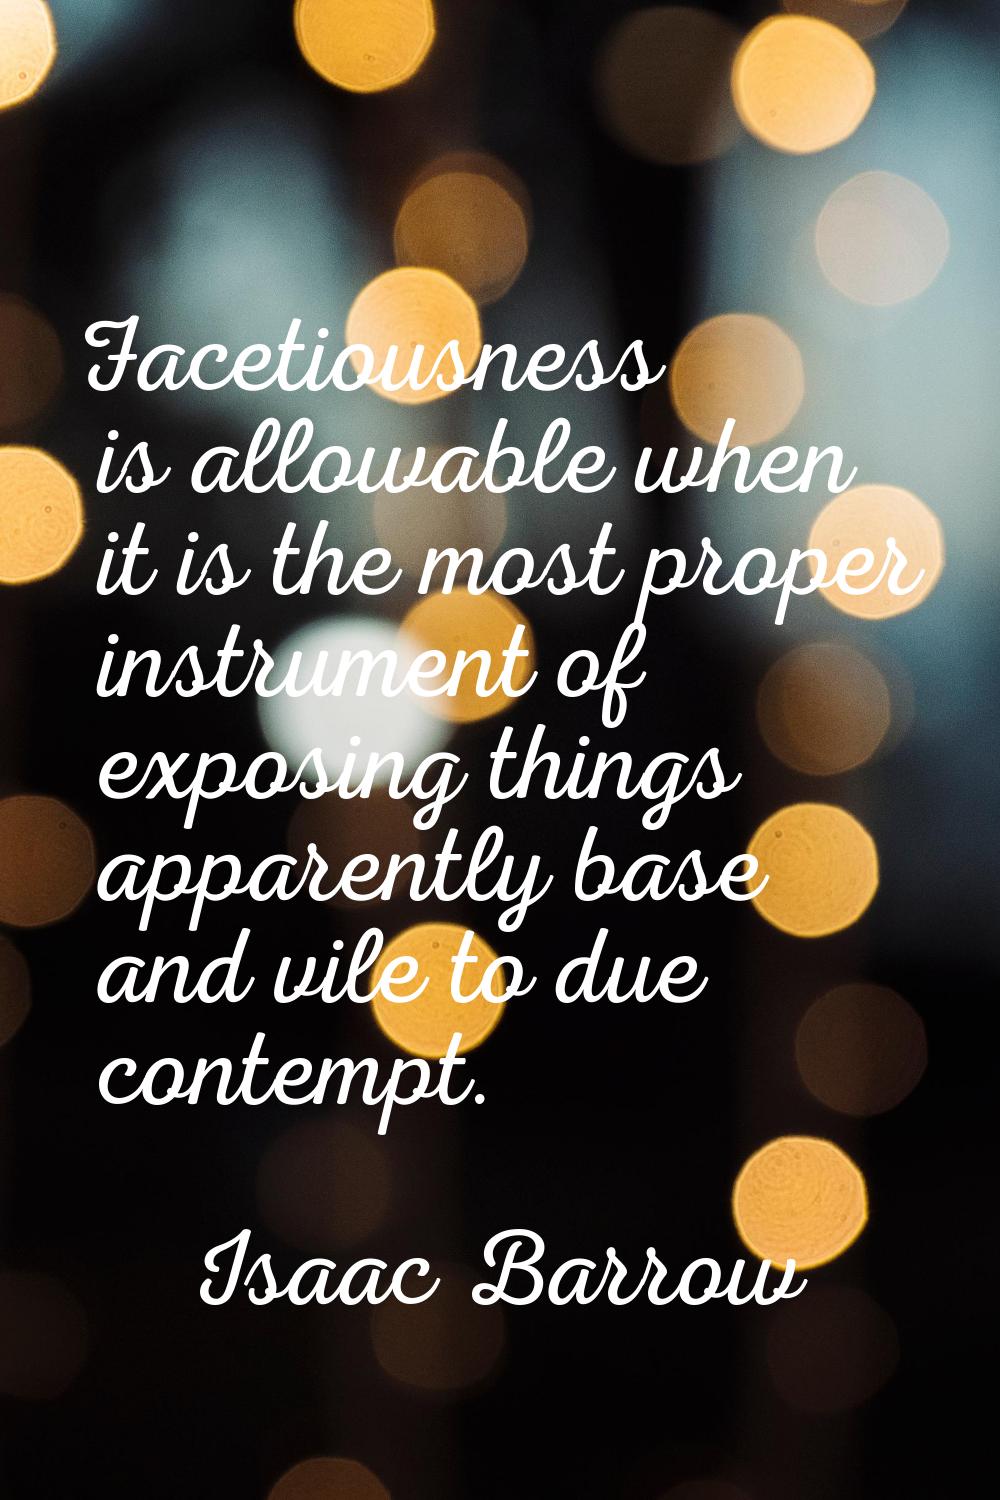 Facetiousness is allowable when it is the most proper instrument of exposing things apparently base